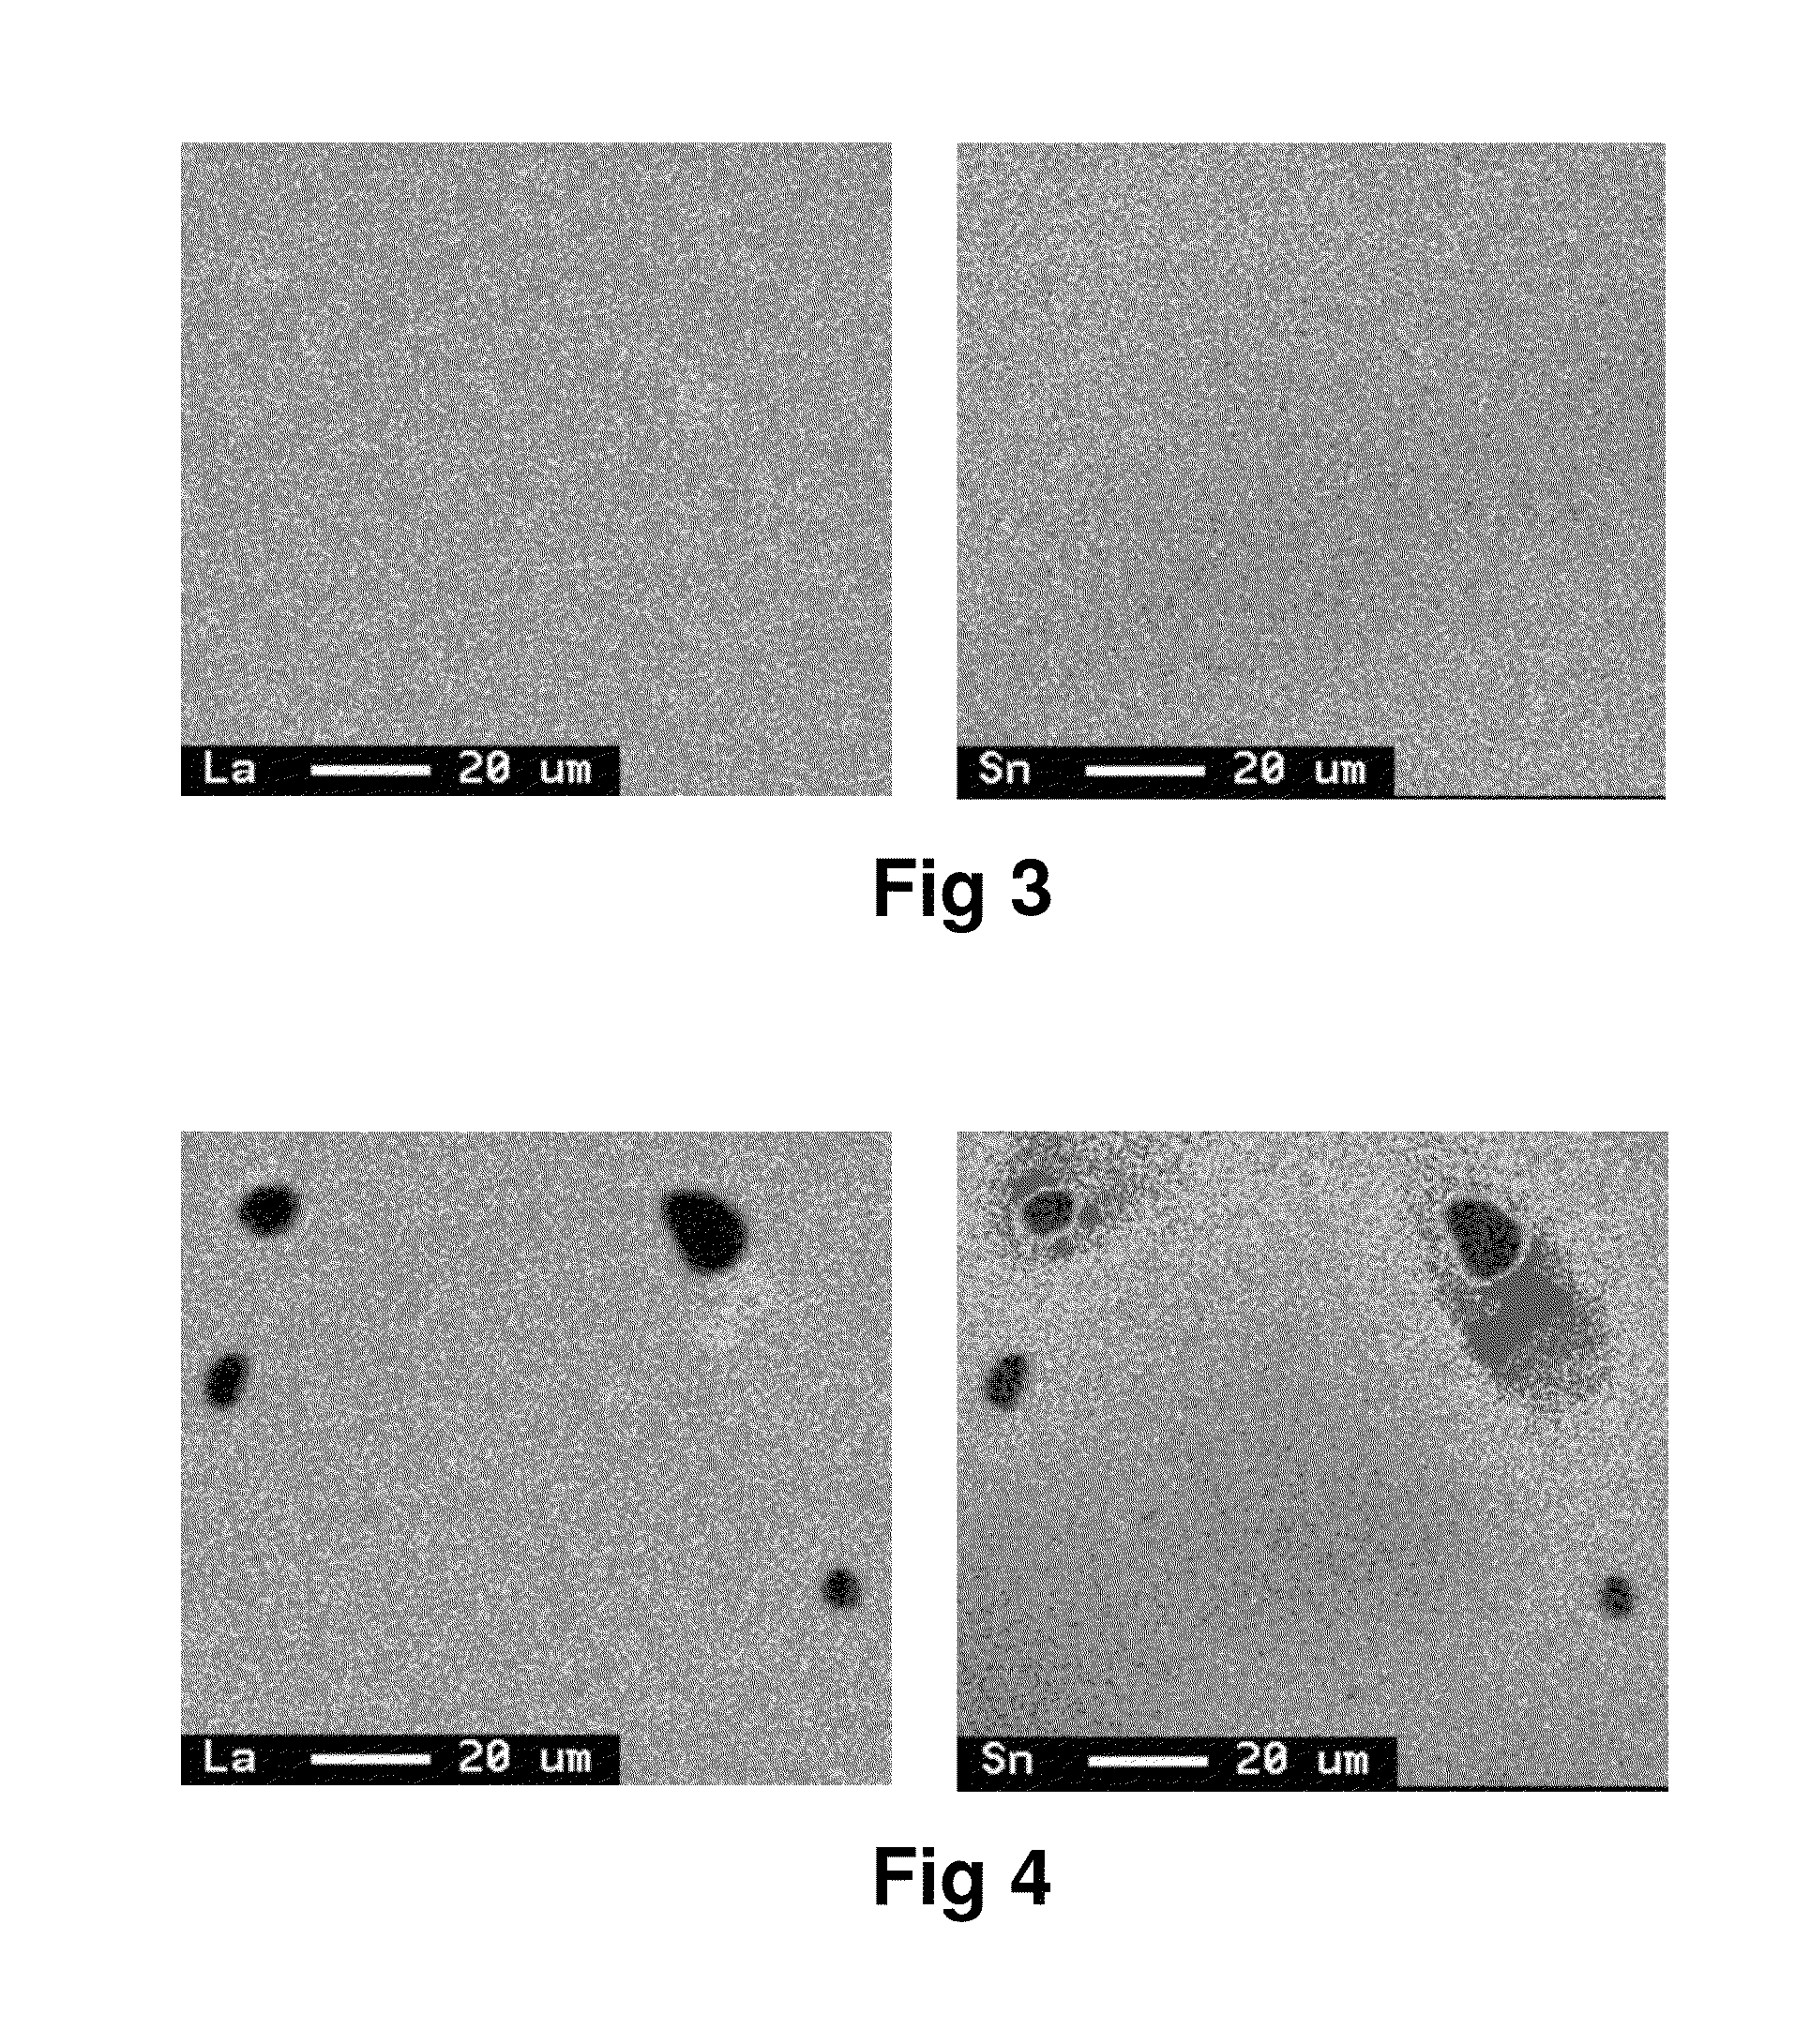 Hydrogen absorbing alloy, negative pole, and nickel-hydrogen secondary battery